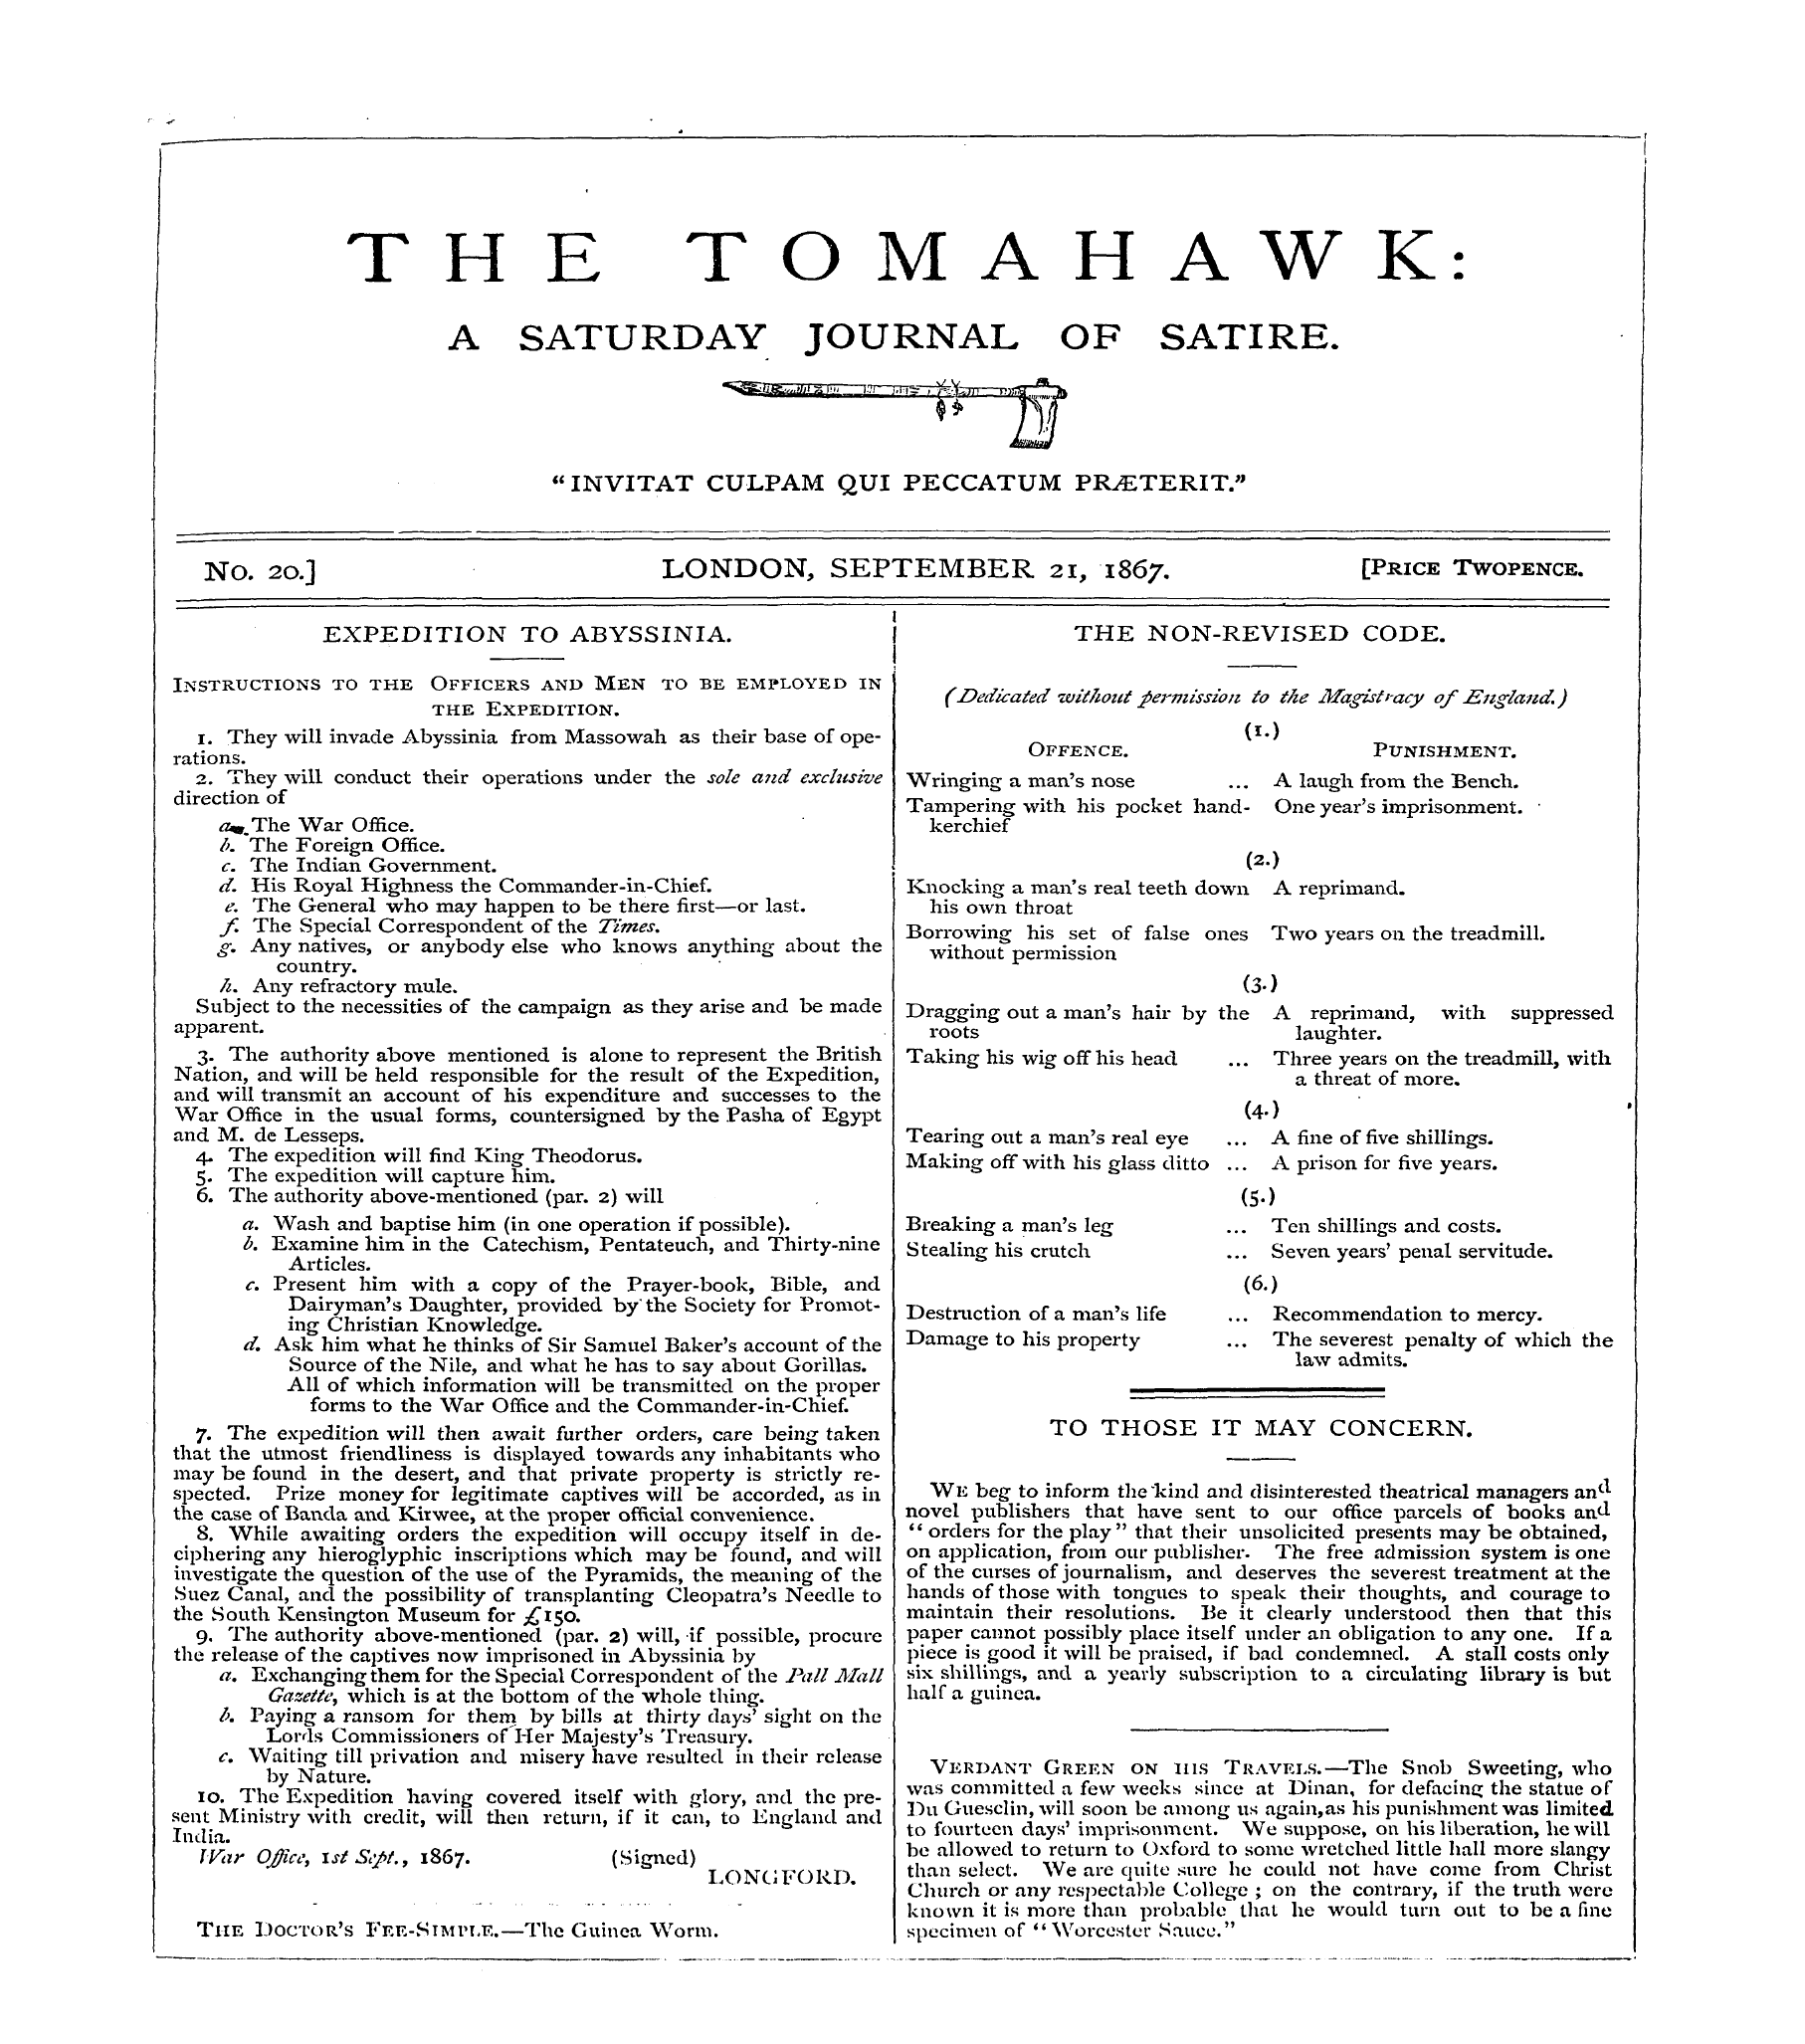 Tomahawk (1867-1870): jS F Y, 1st edition - Instructions To The Officers And Men To ...